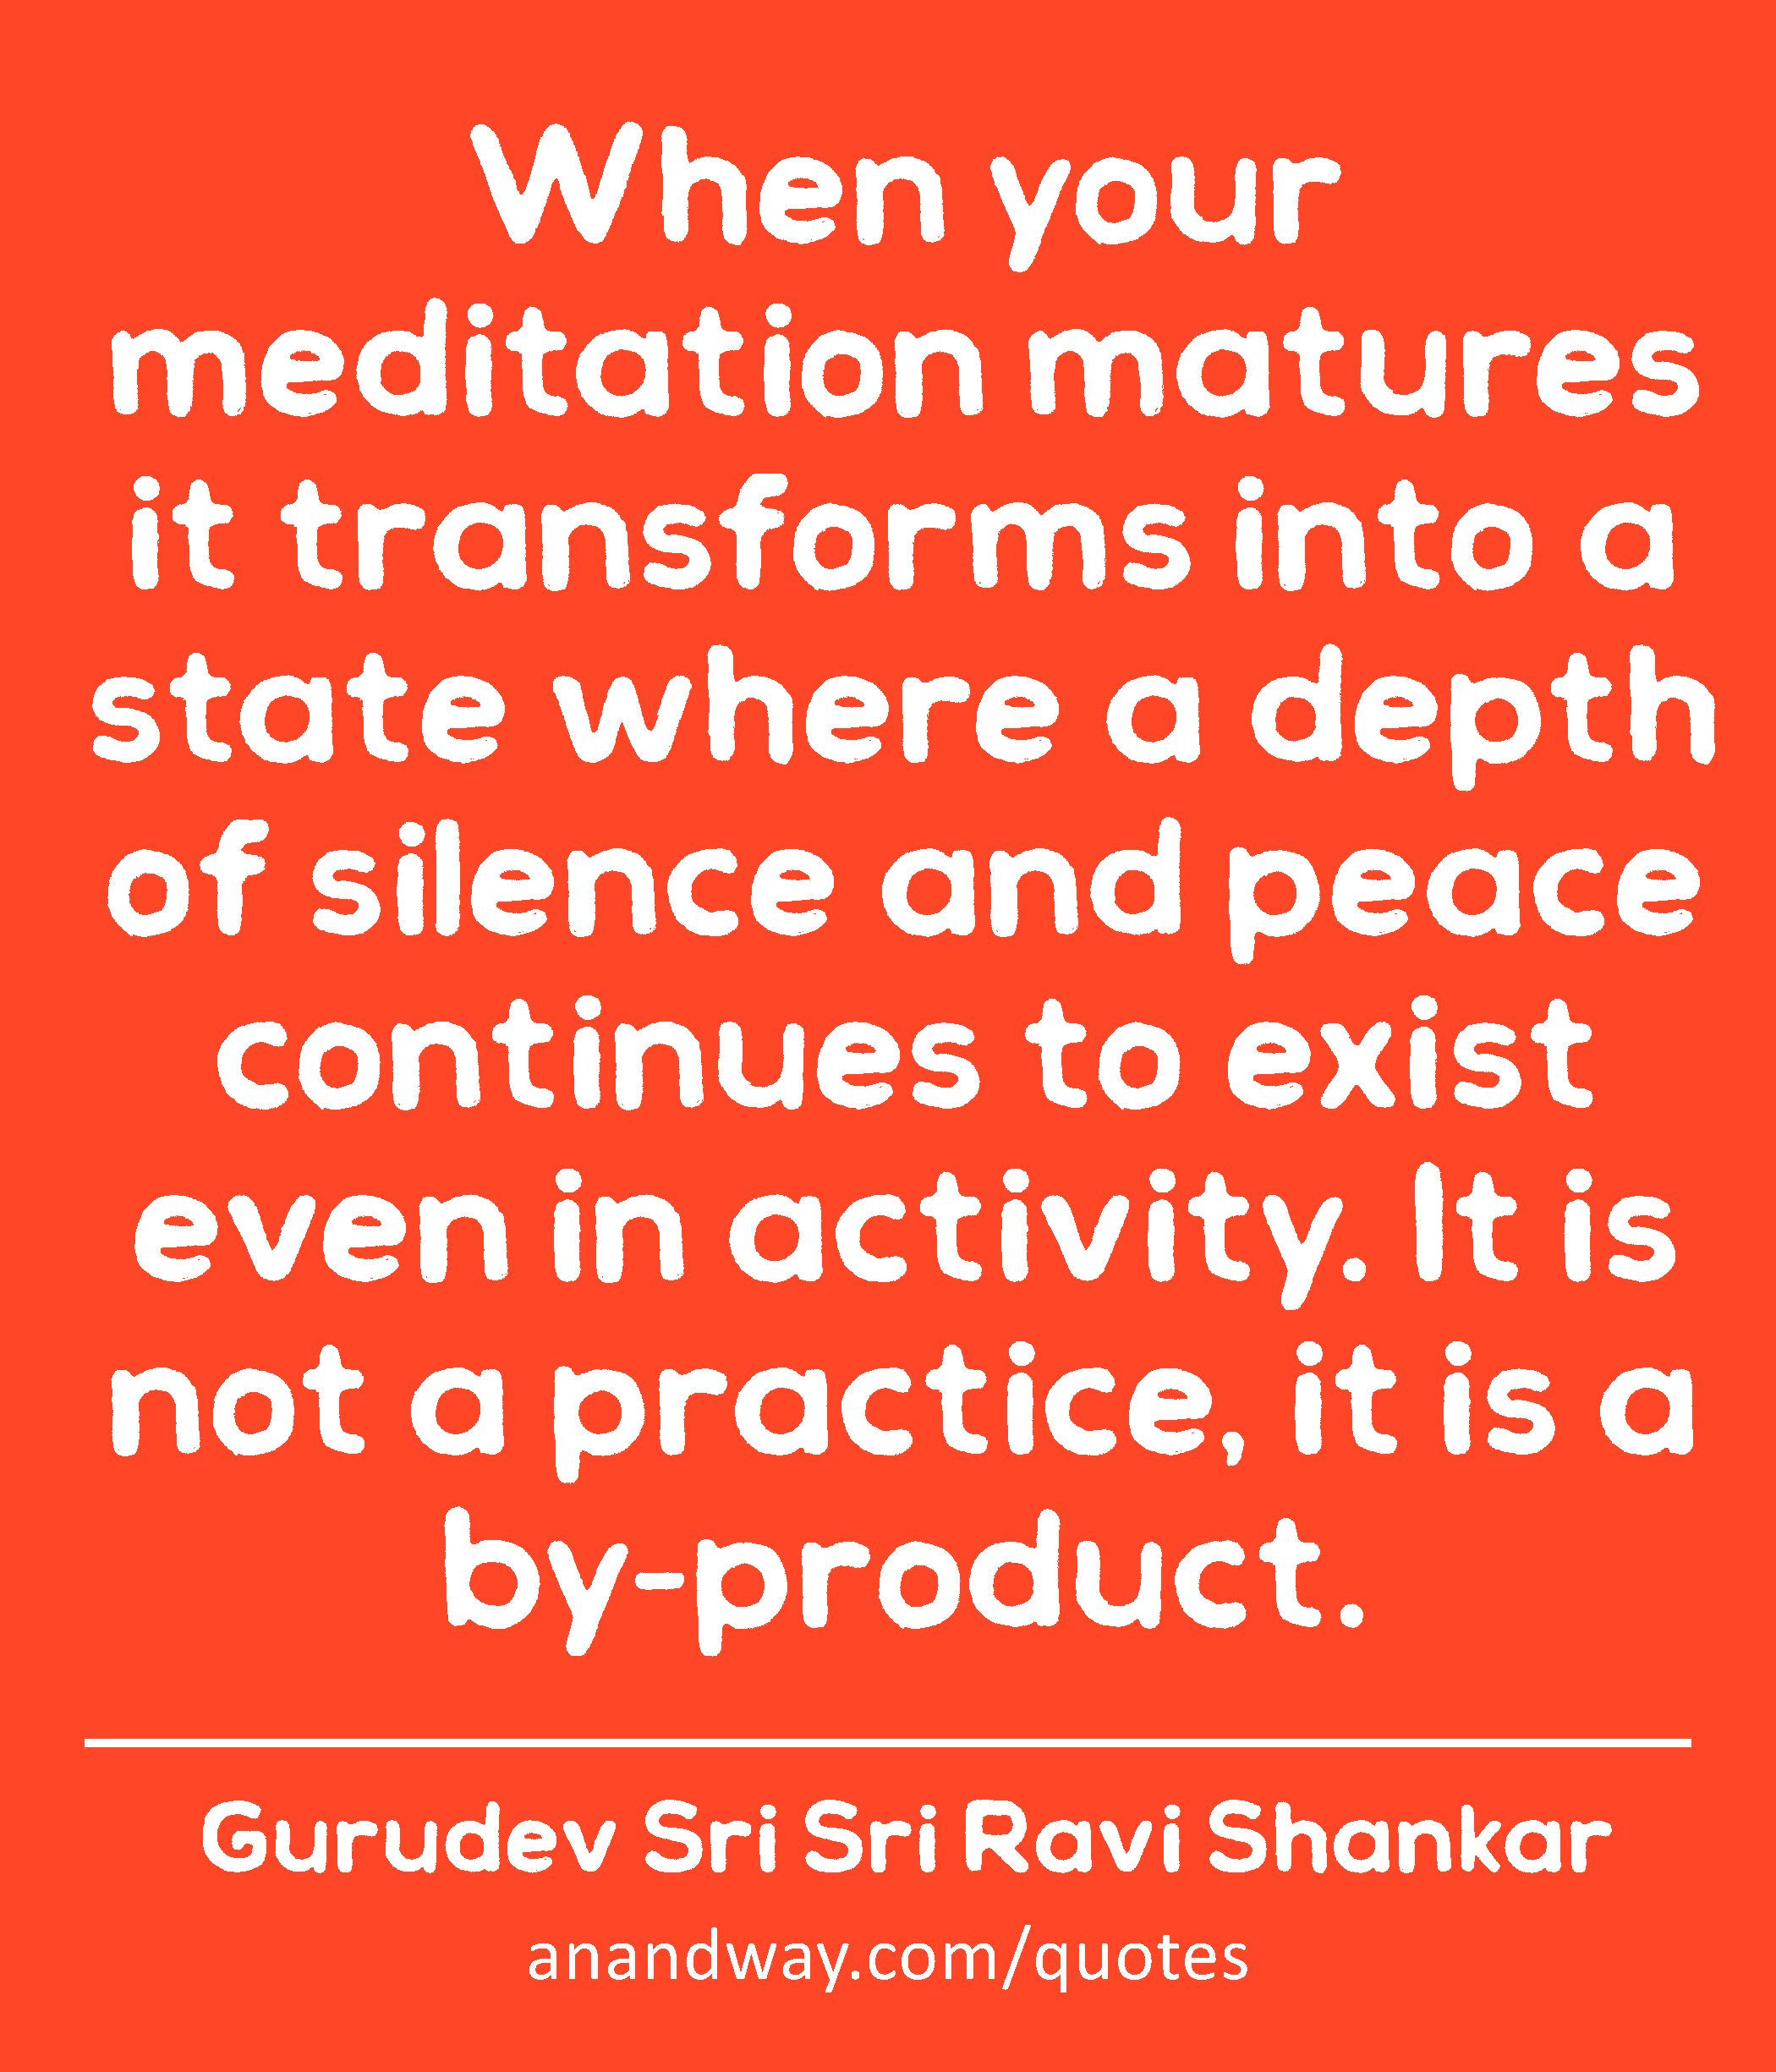 When your meditation matures it transforms into a state where a depth of silence and peace
 -Gurudev Sri Sri Ravi Shankar